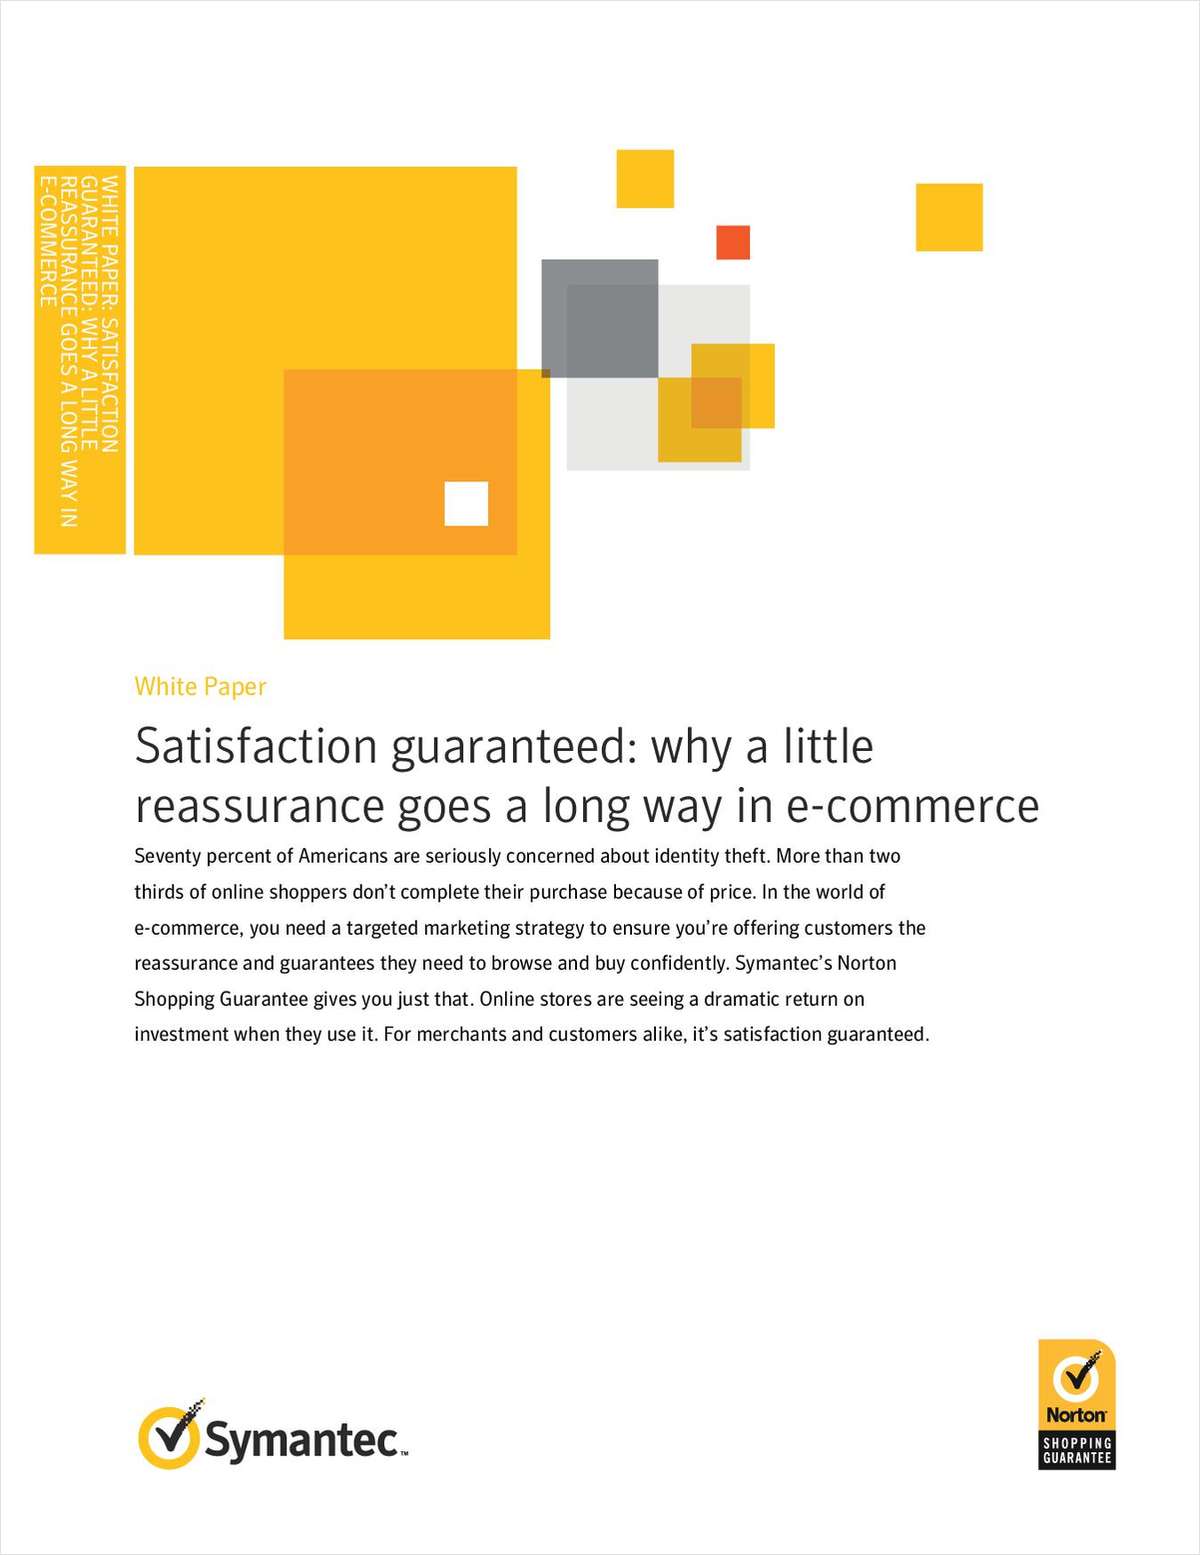 Satisfaction Guaranteed: Why a Little Reassurance Goes a Long Way in e-Commerce